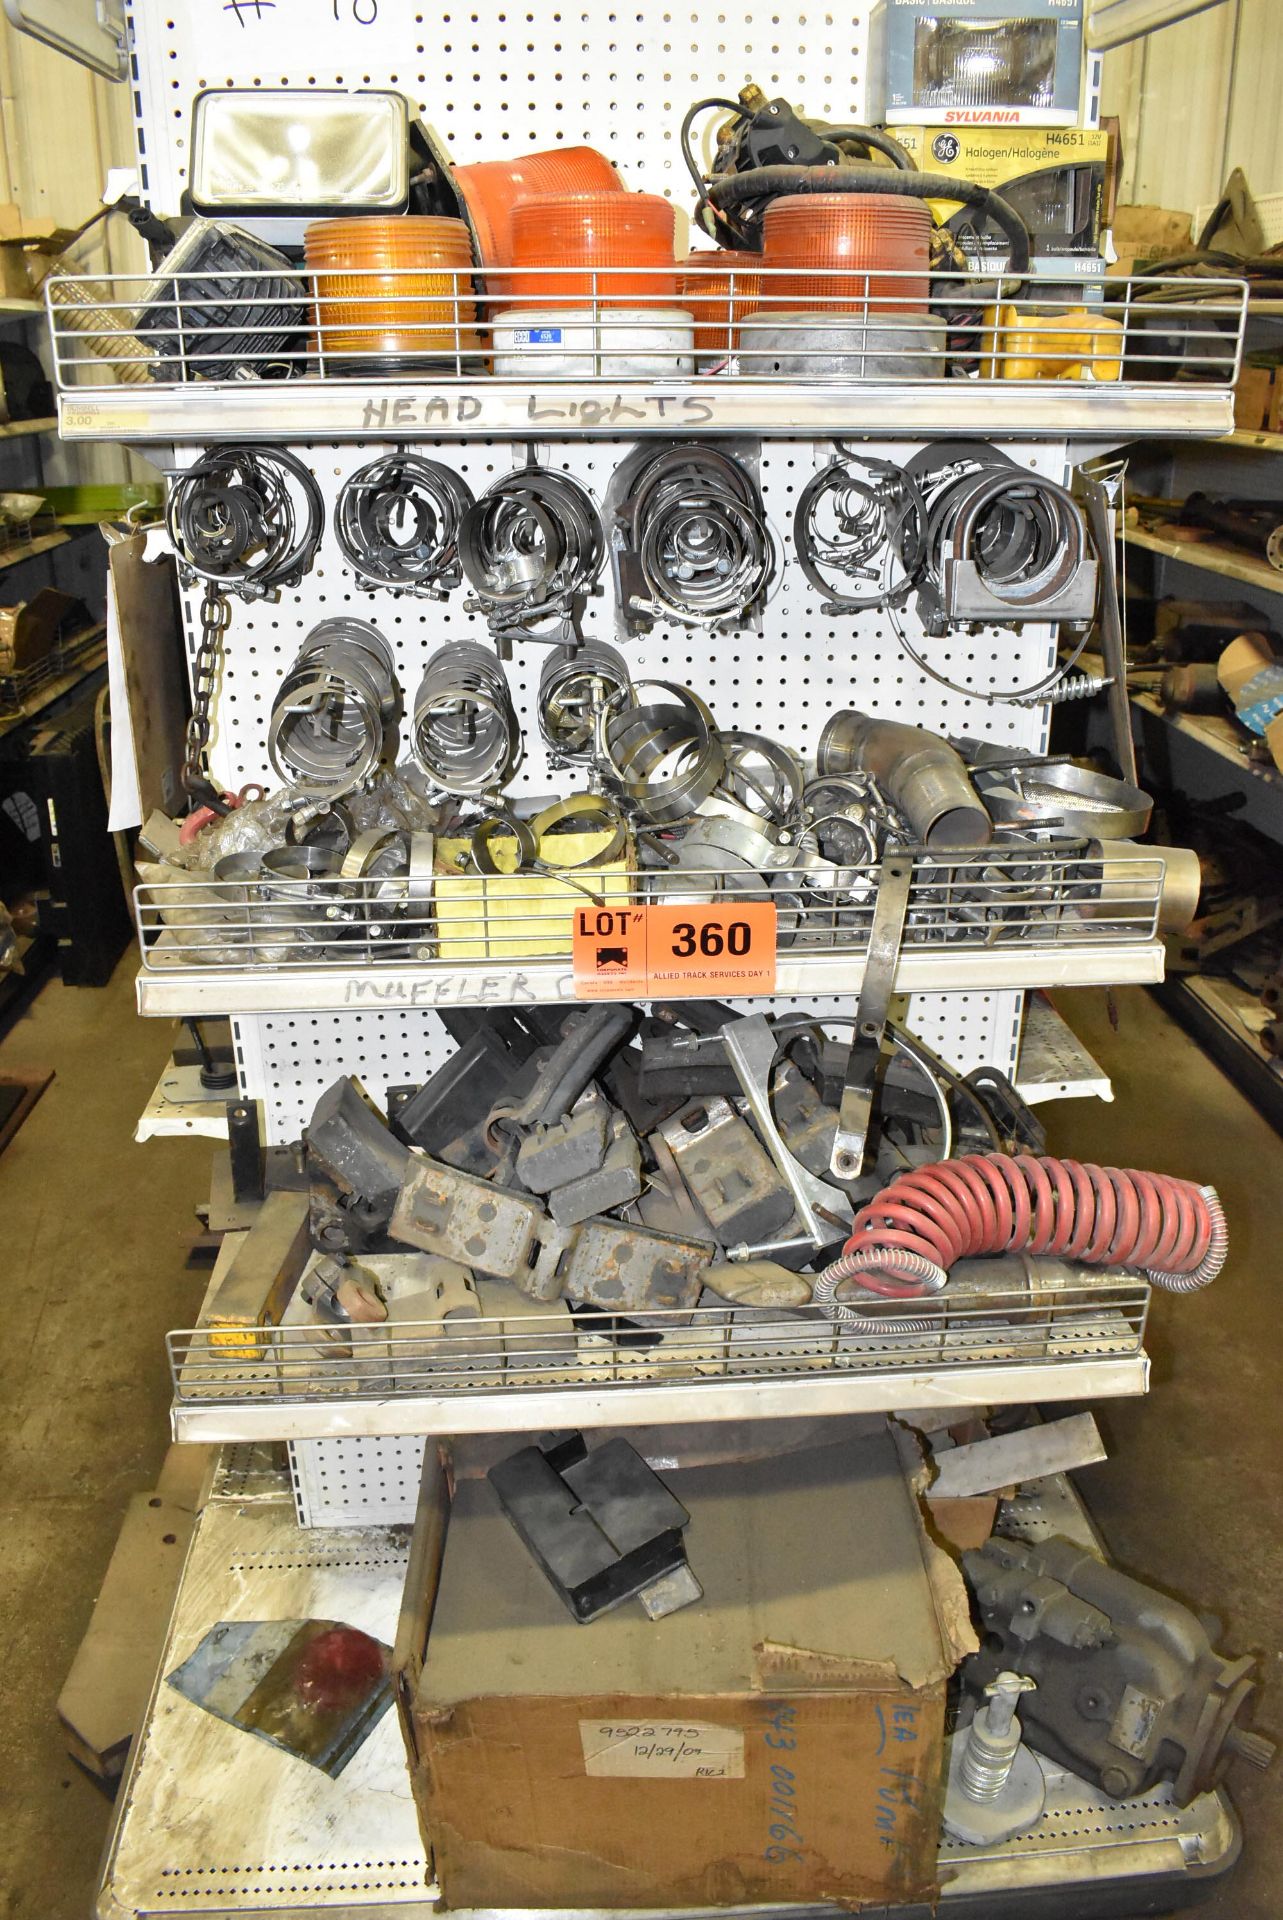 LOT/ CONTENTS OF RACK - EXCAVATOR PARTS, CONTROLS, HYDRAULIC PARTS, HARDWARE AND COMPONENTS (LOCATED